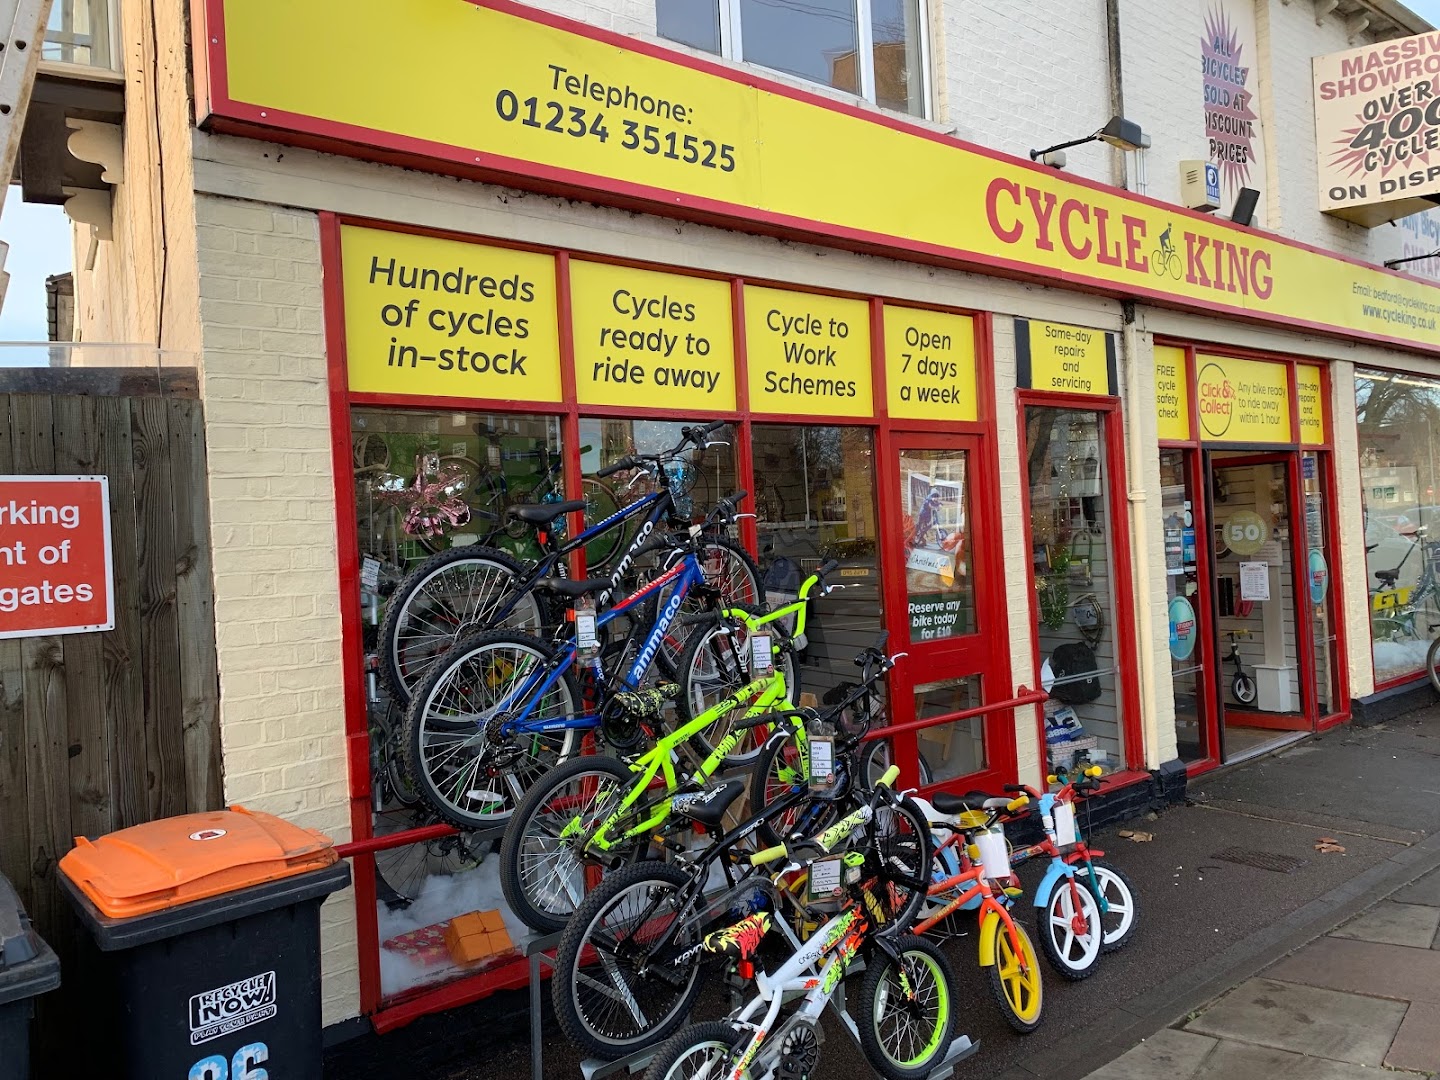 Cycle King Bedford